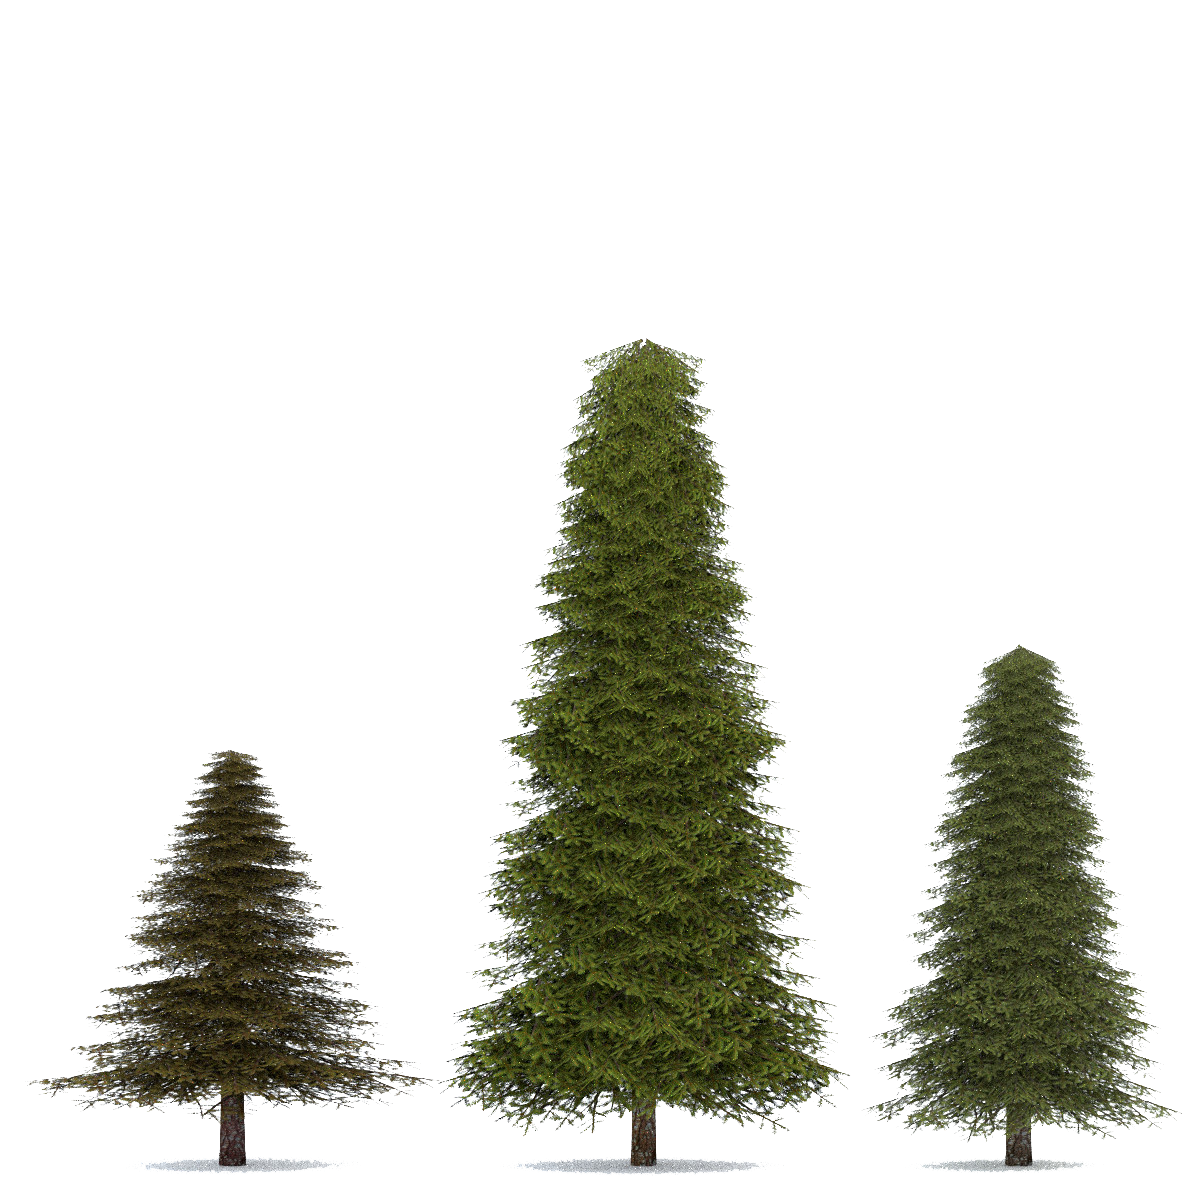 Fir-Tree Png File PNG Image